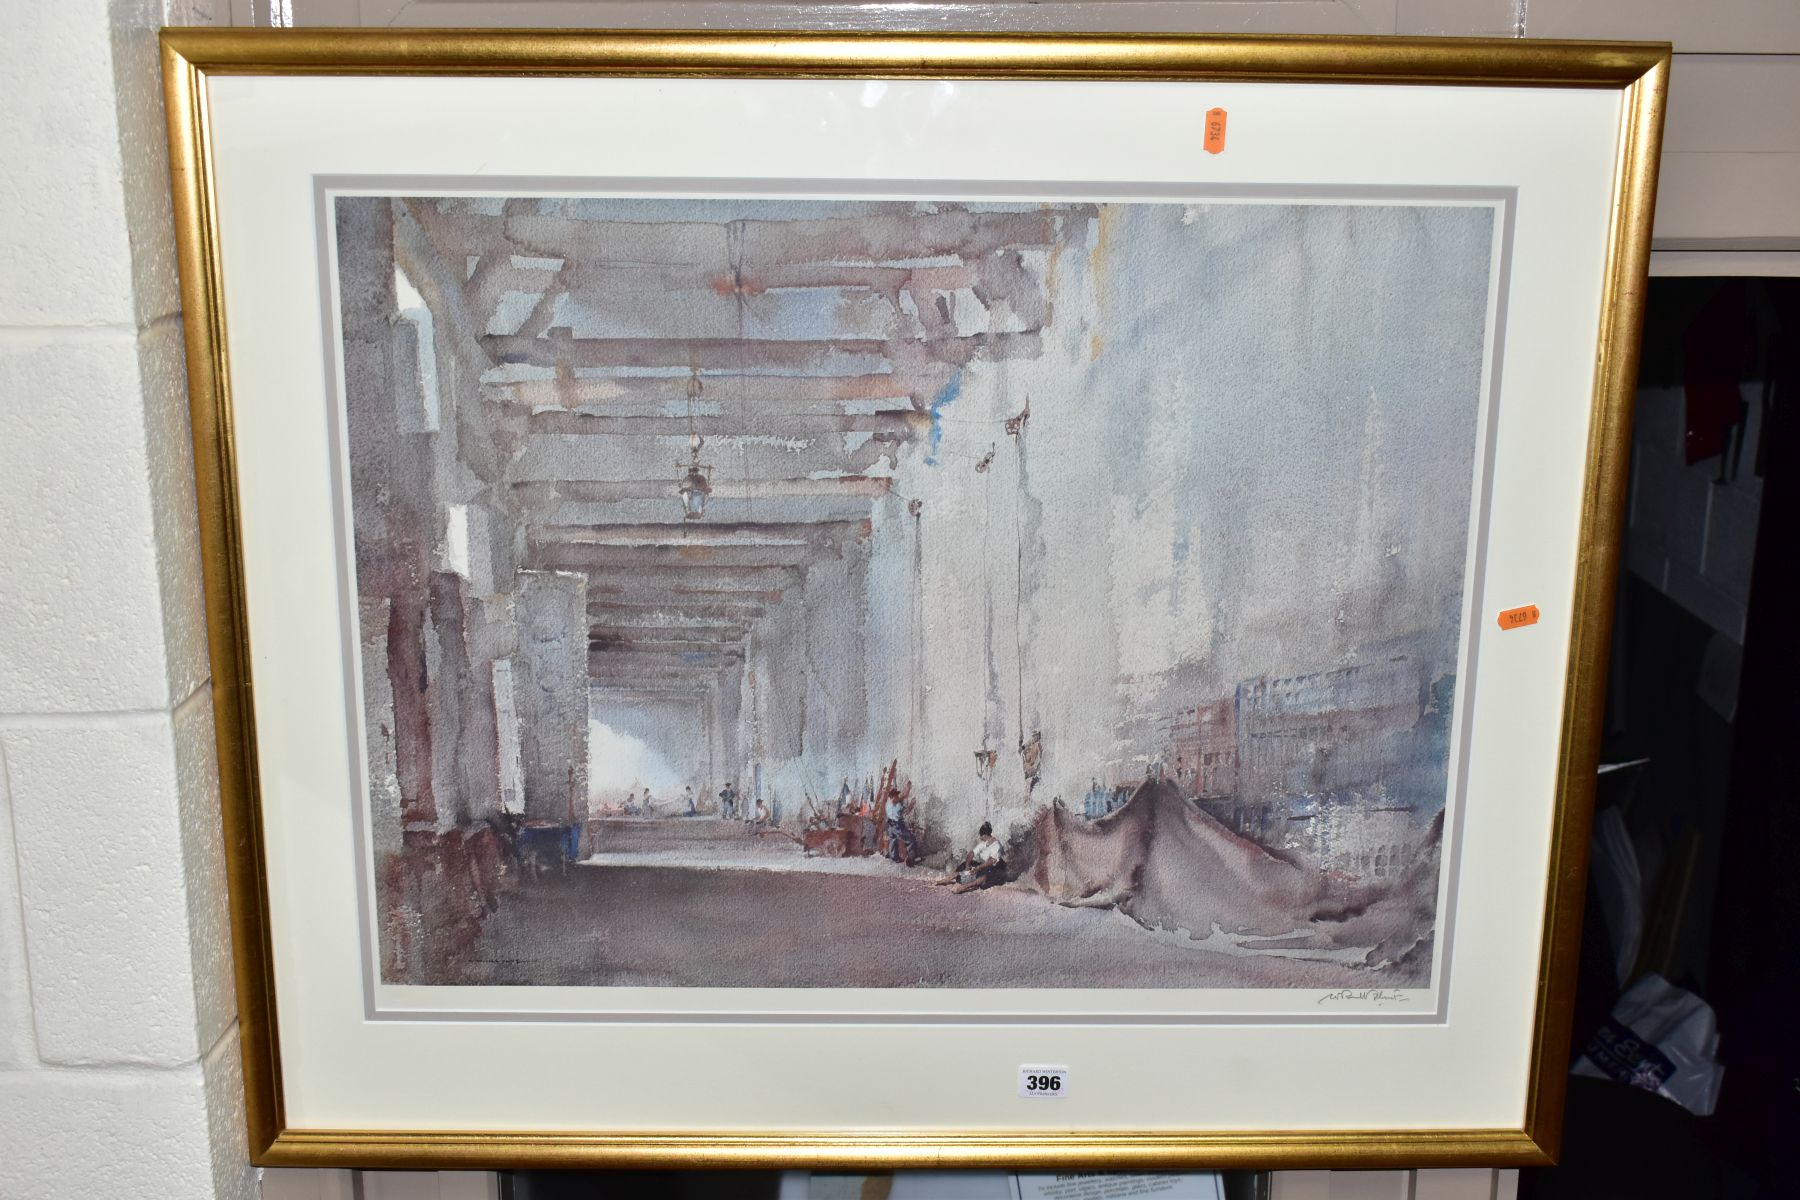 WILLIAM RUSSELL FLINT (1881-1969) 'WHITE INTERIOR, CHATEAUNEUF SUR LOIRE', a signed limited